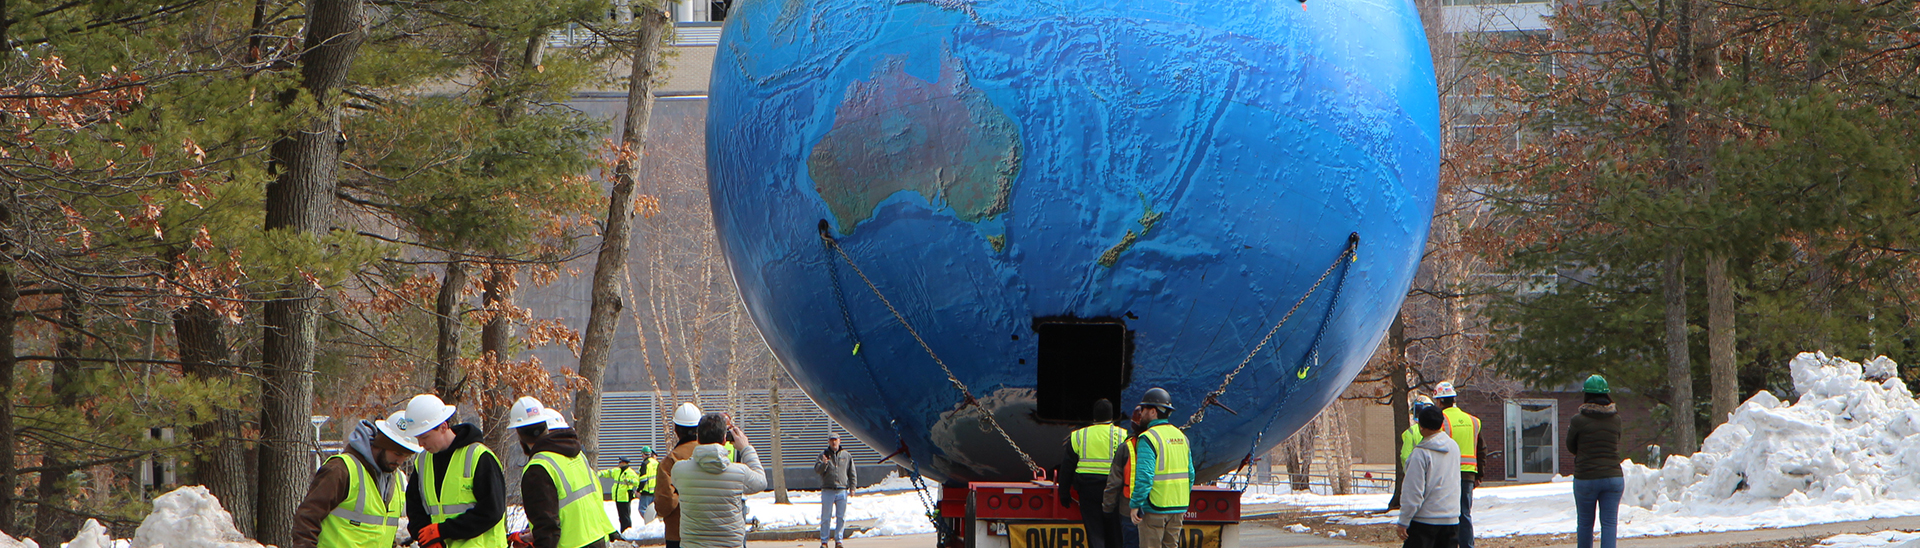 Moving the Babson Globe